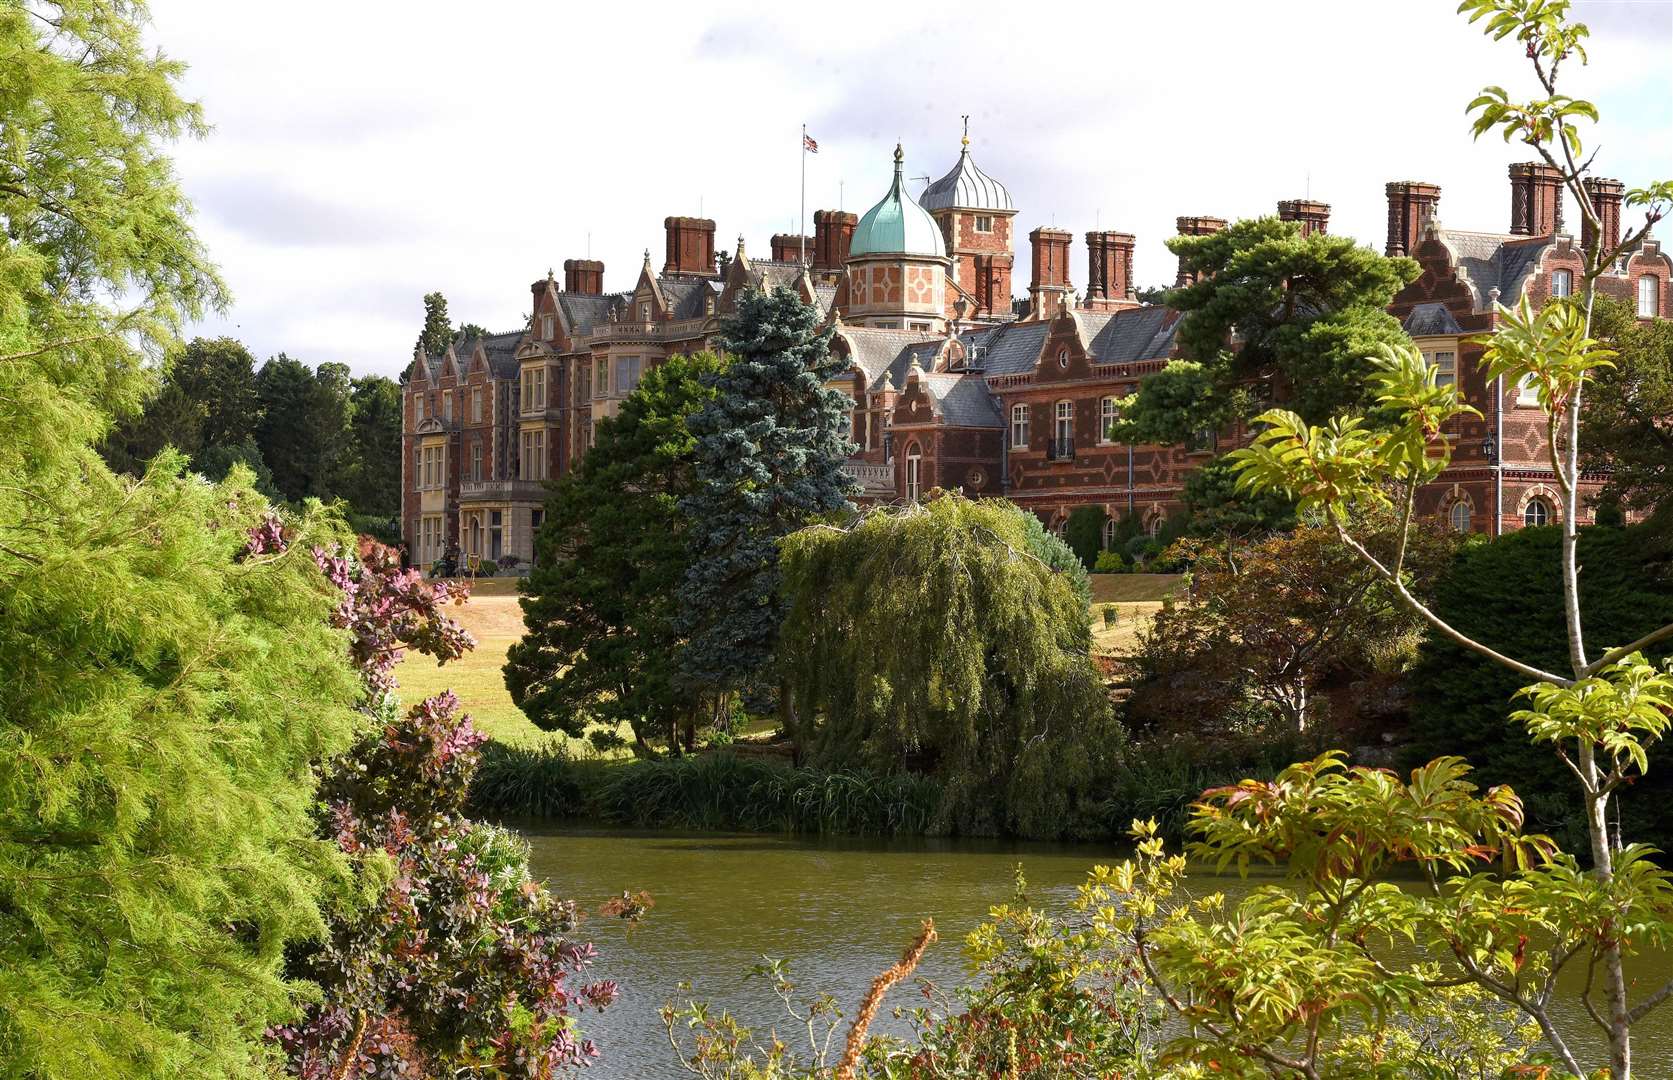 Sandringham House – John Pettman met Queen Elizabeth II and shared treasured memories of a chat with her as a teenager